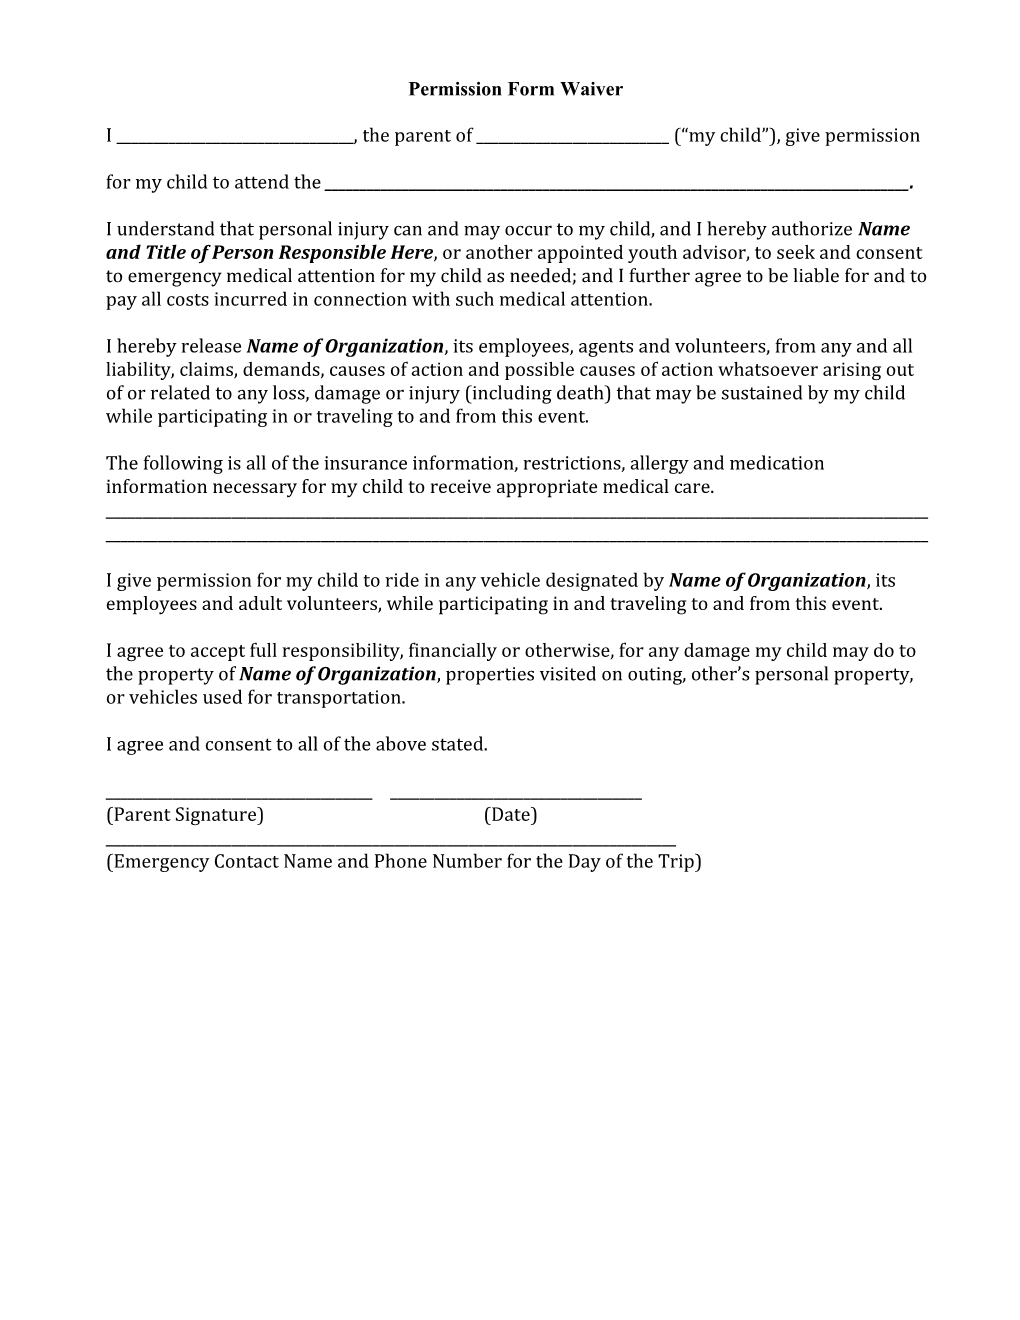 Permission Slip and Liability Waiver